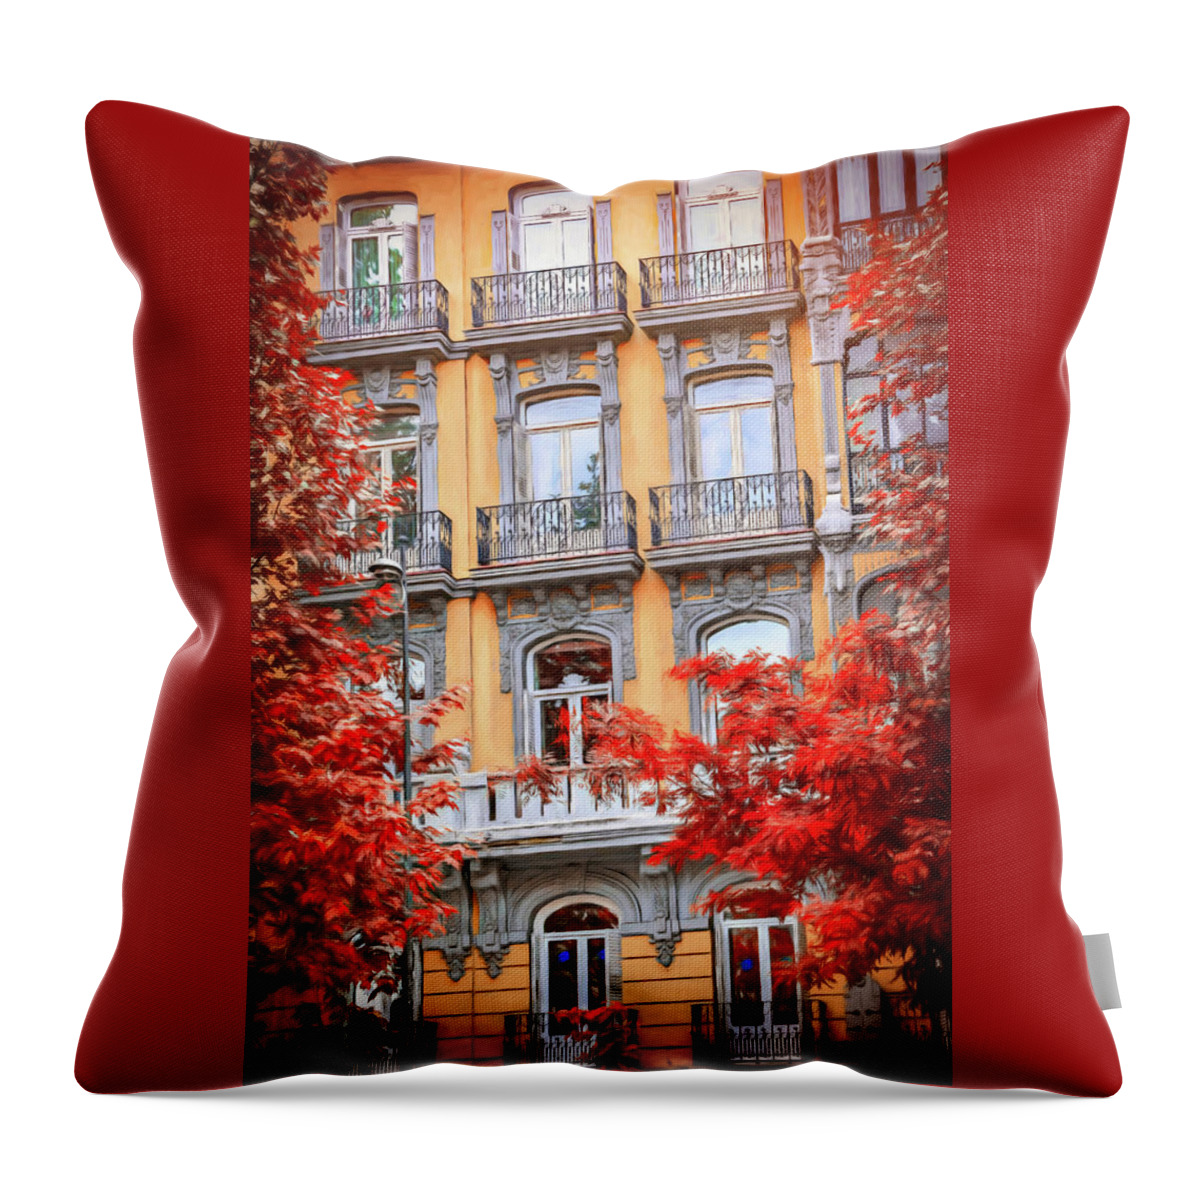 Madrid Throw Pillow featuring the photograph Balconies of Madrid Spain by Carol Japp